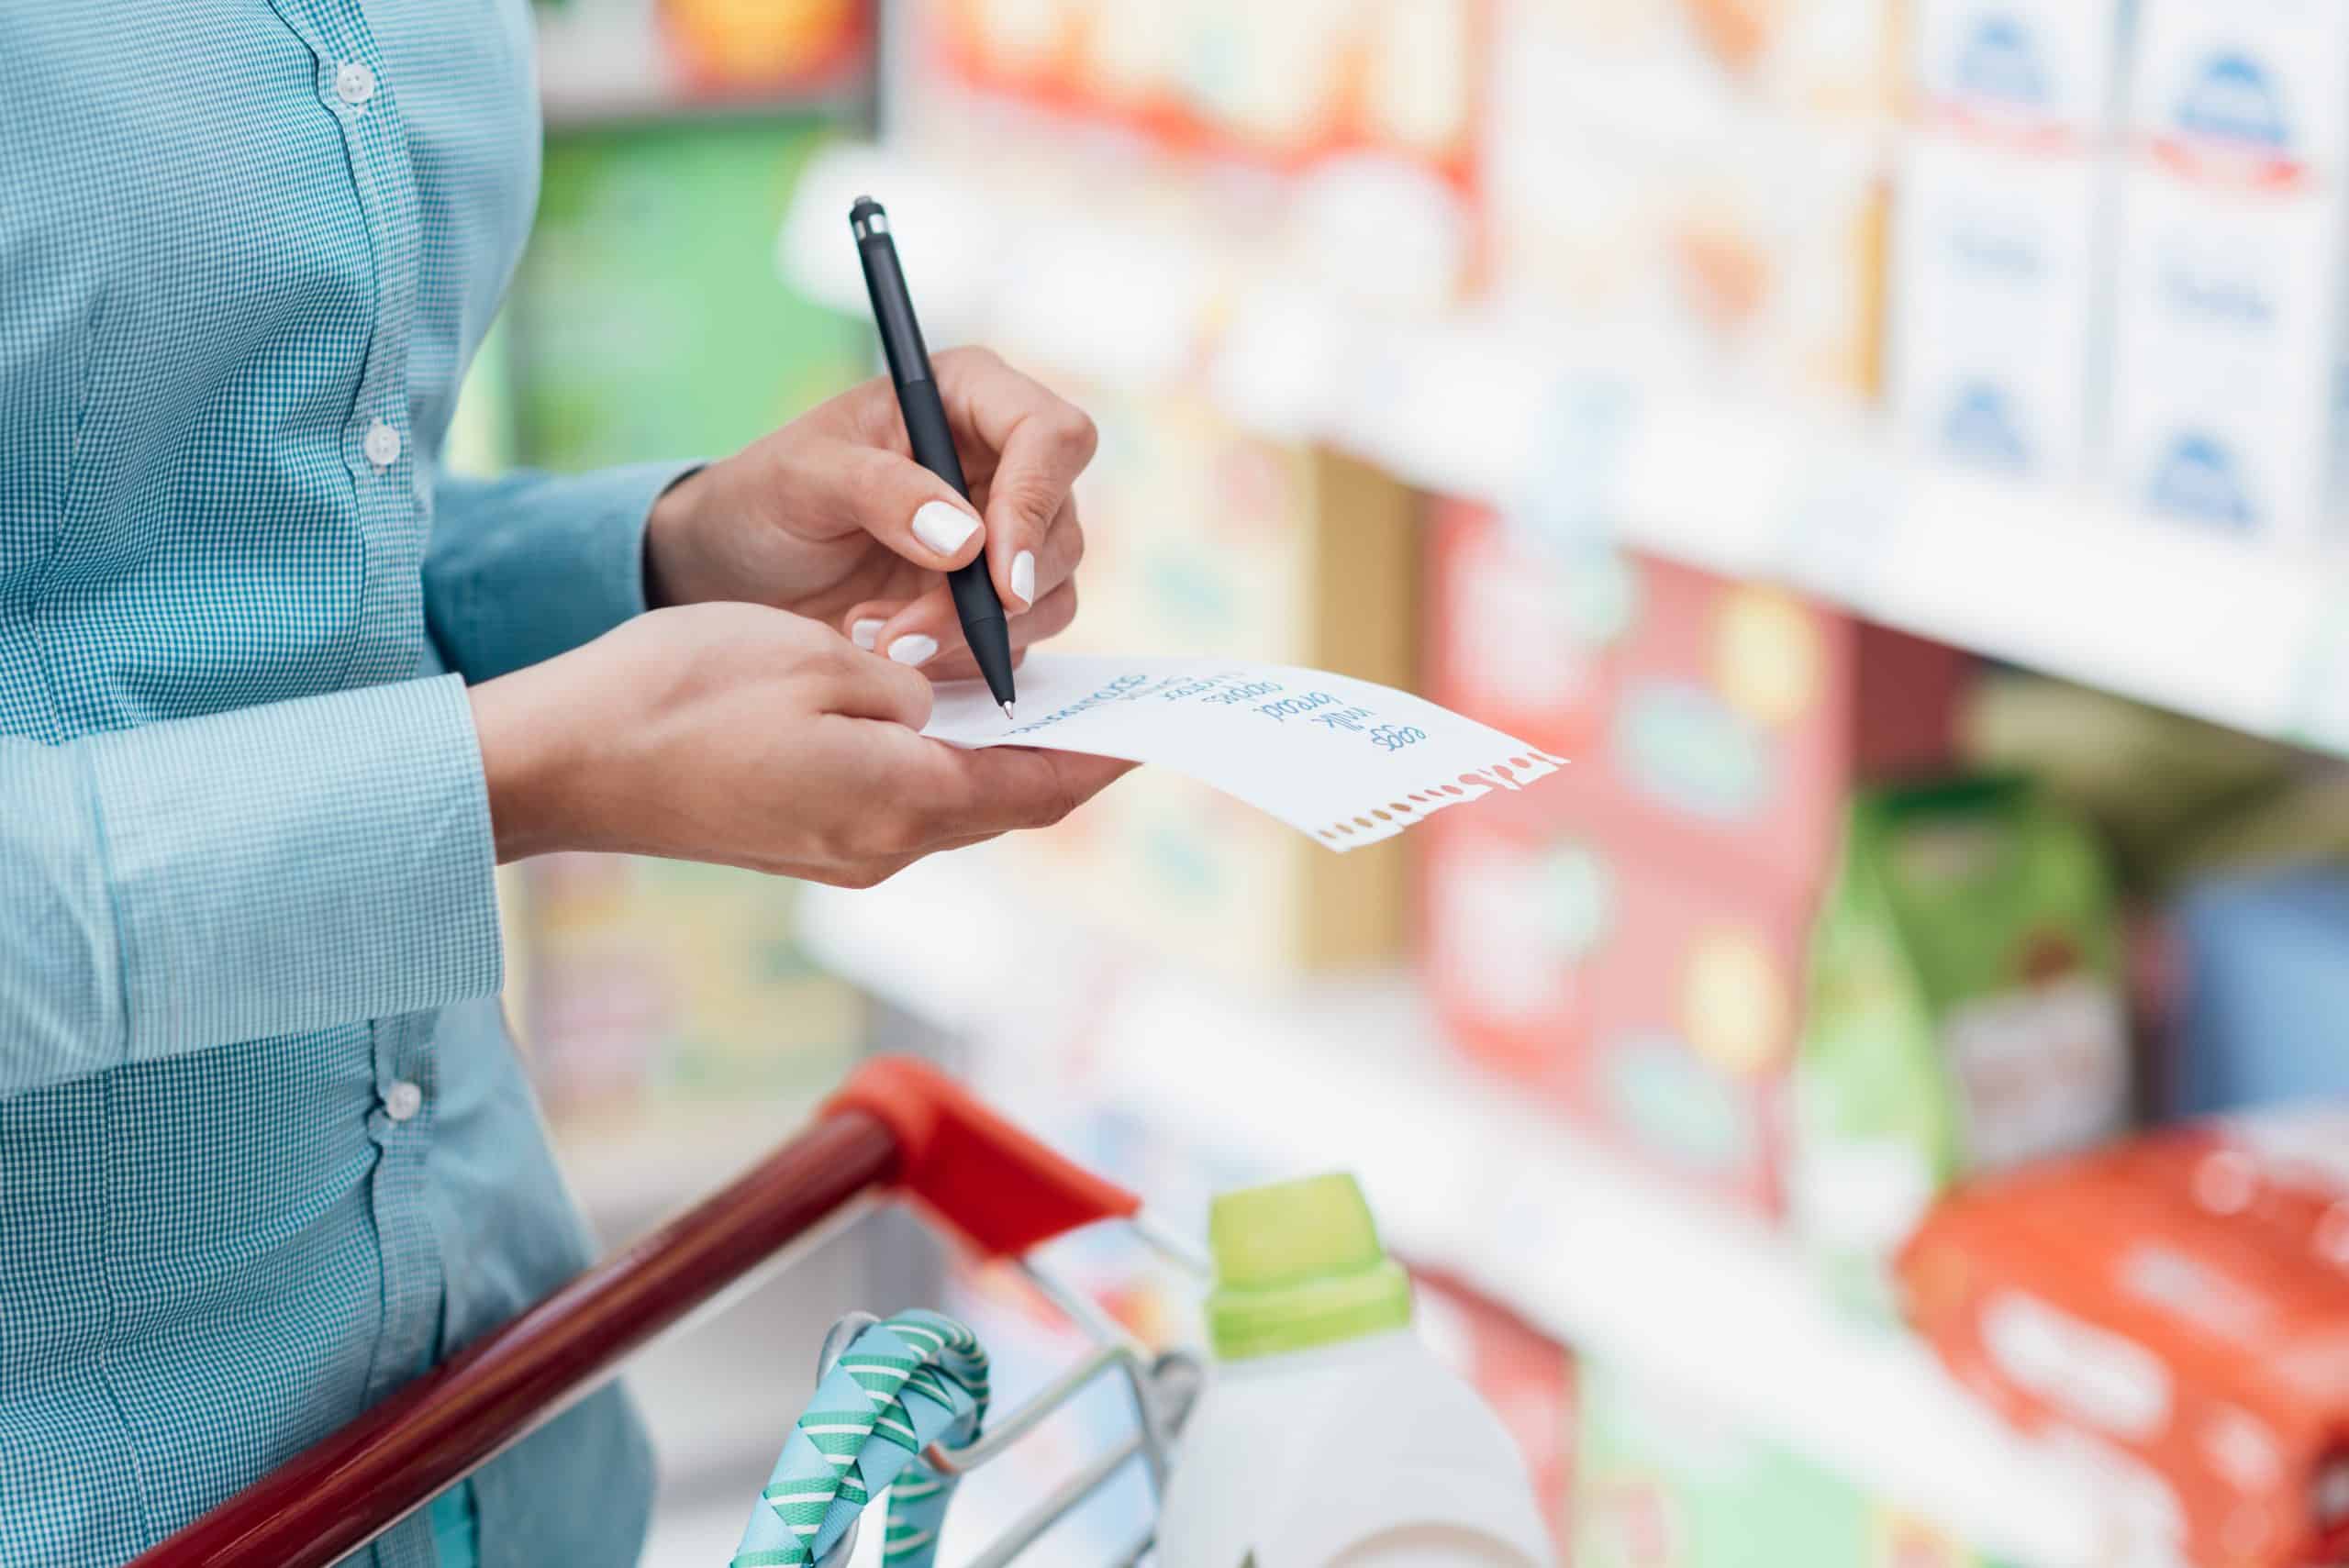 Closeup of woman's hand crossing off items on list in grocery store